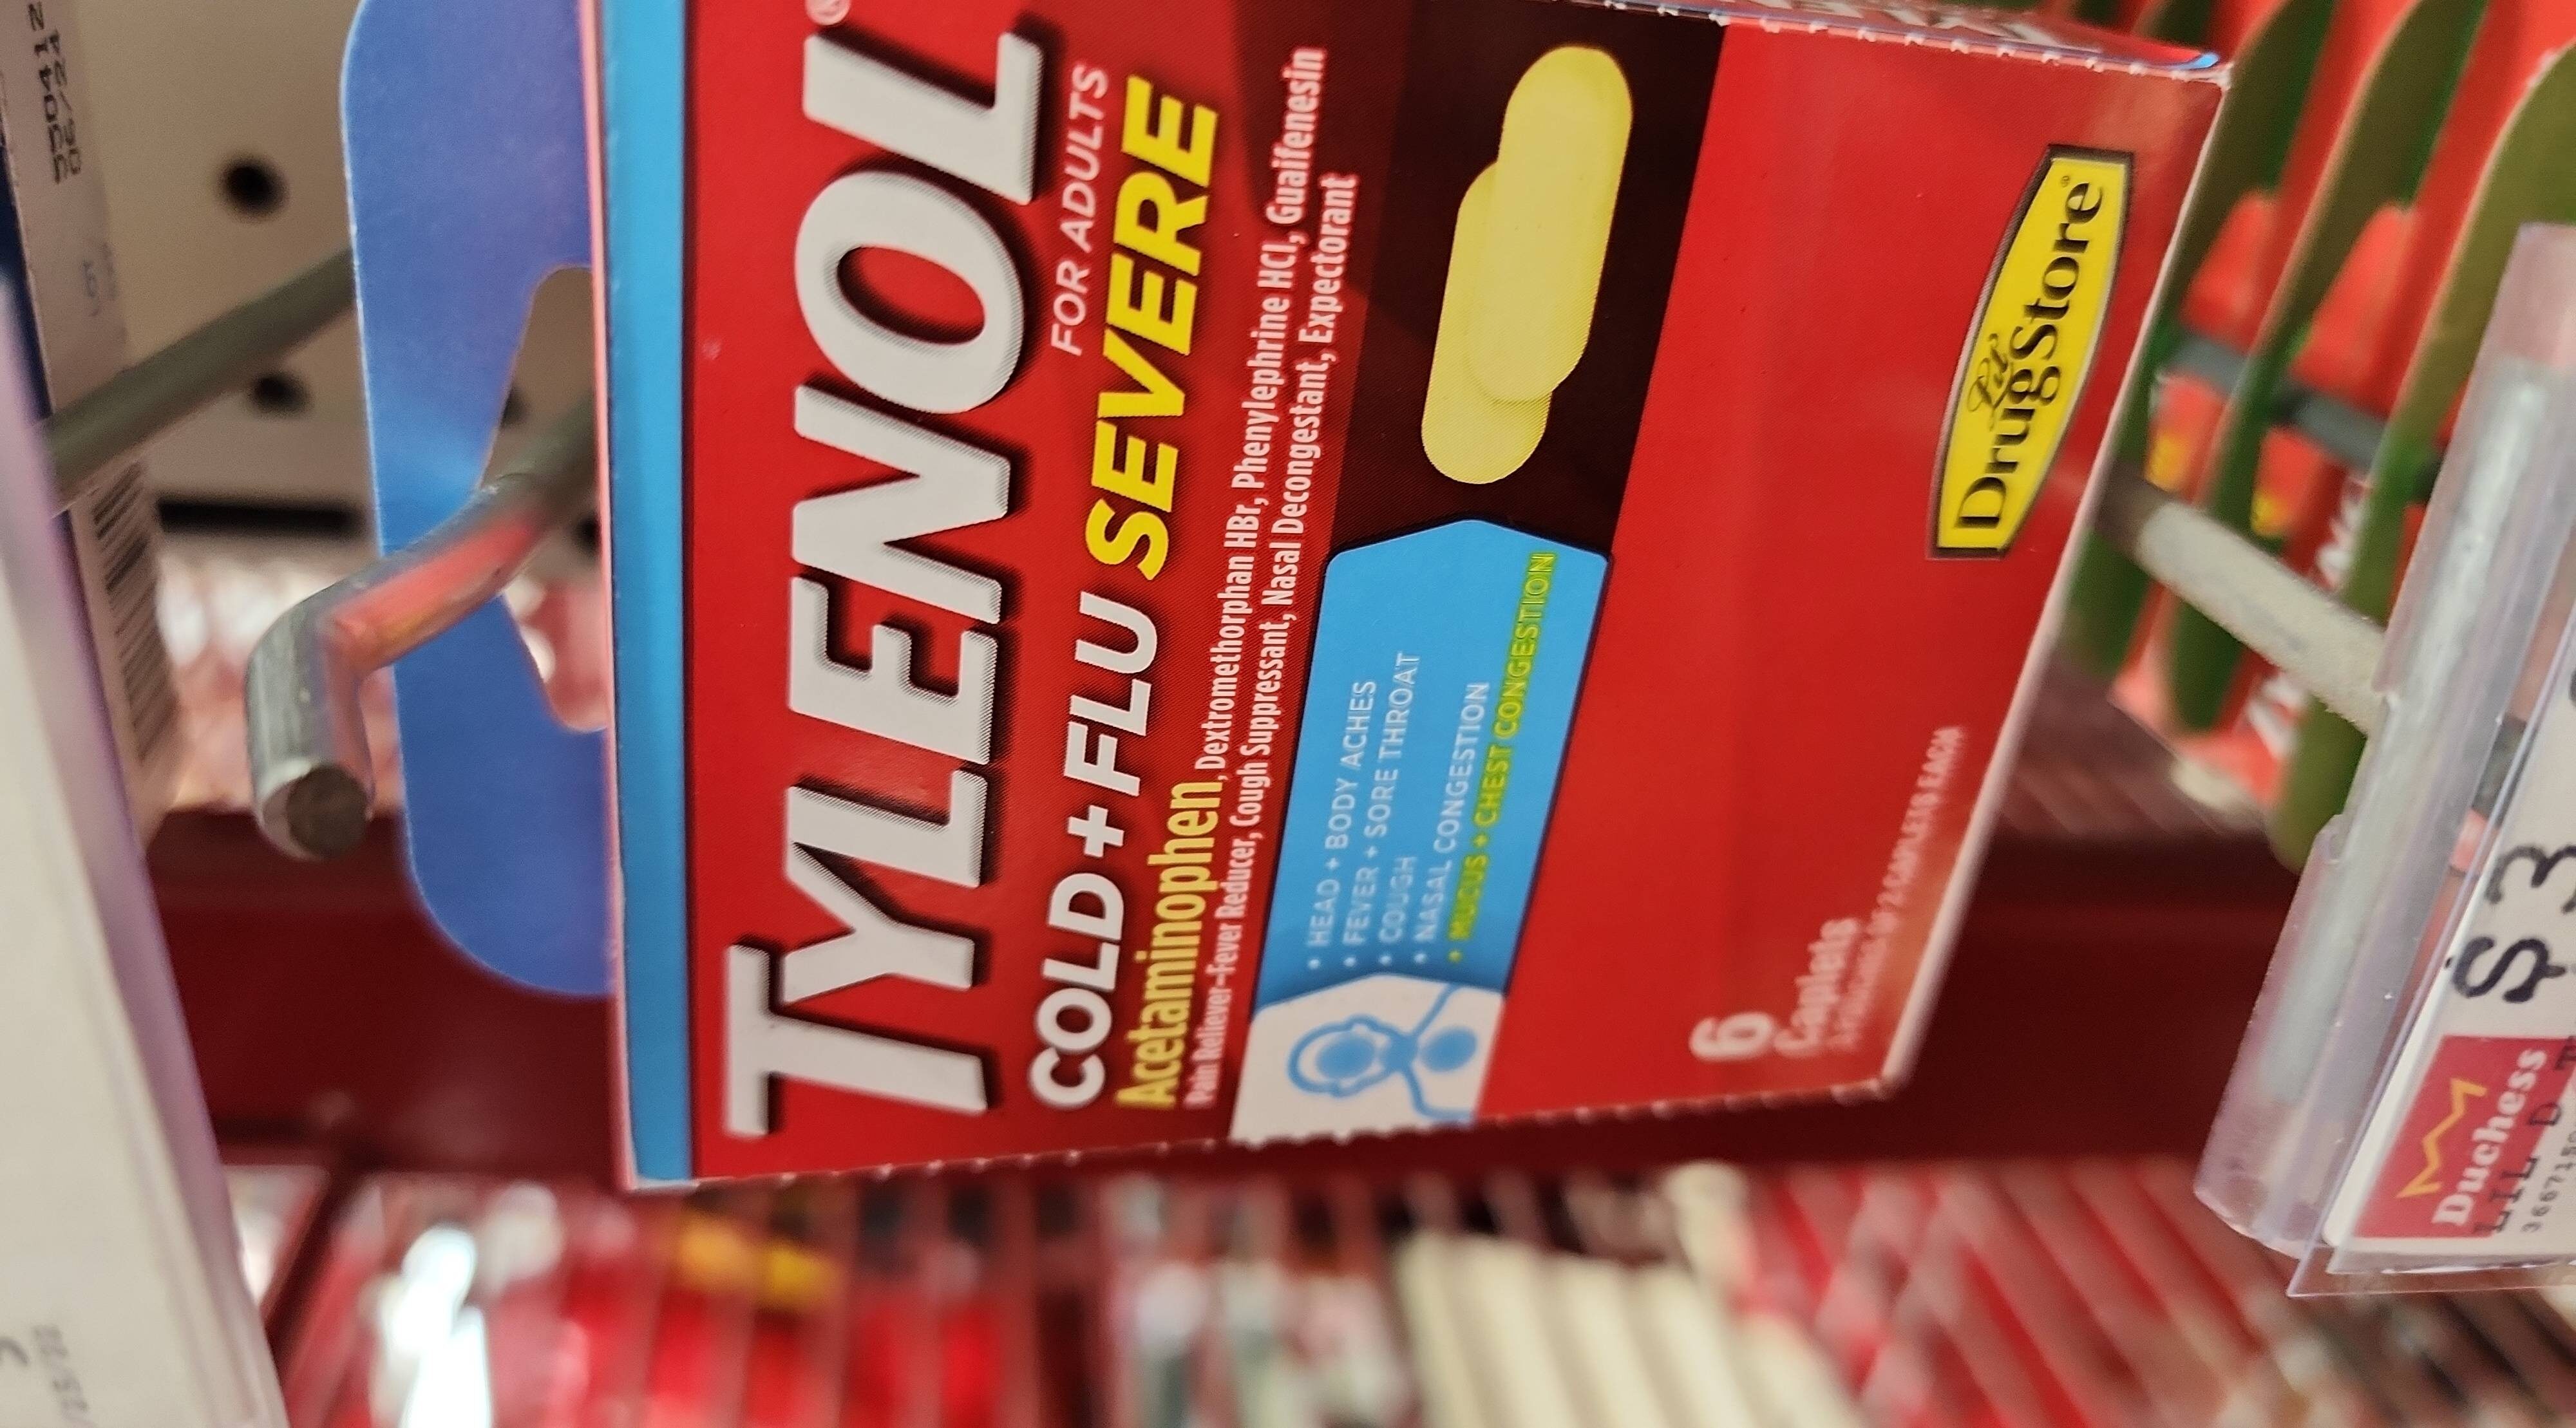 Tylenol cold and flu severe trial peg - Product - en